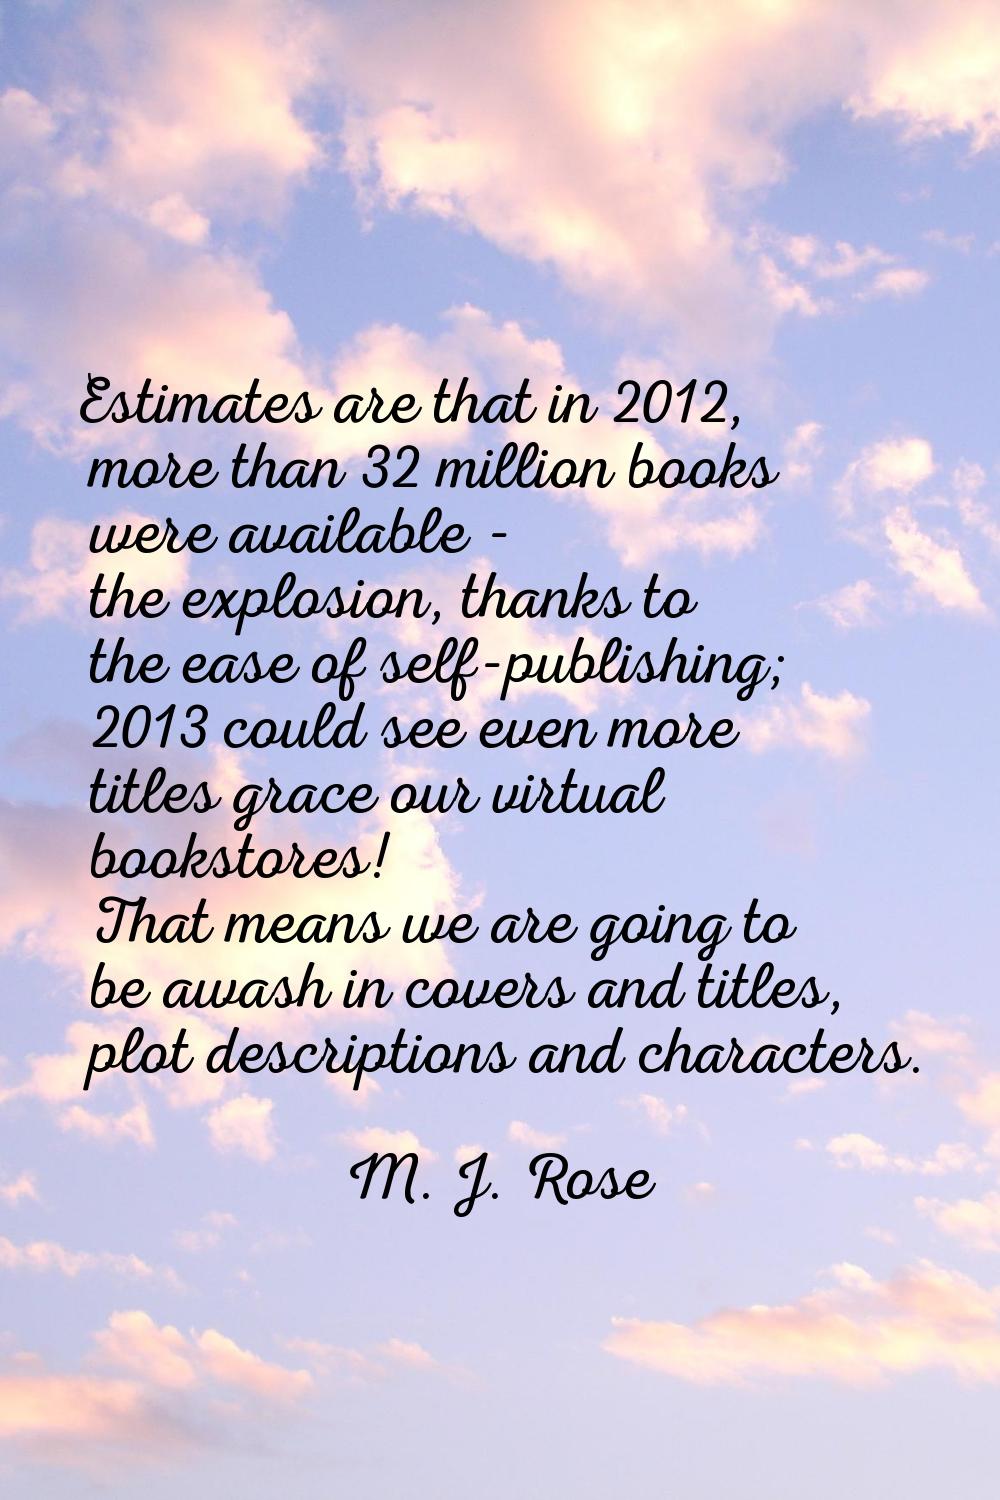 Estimates are that in 2012, more than 32 million books were available - the explosion, thanks to th